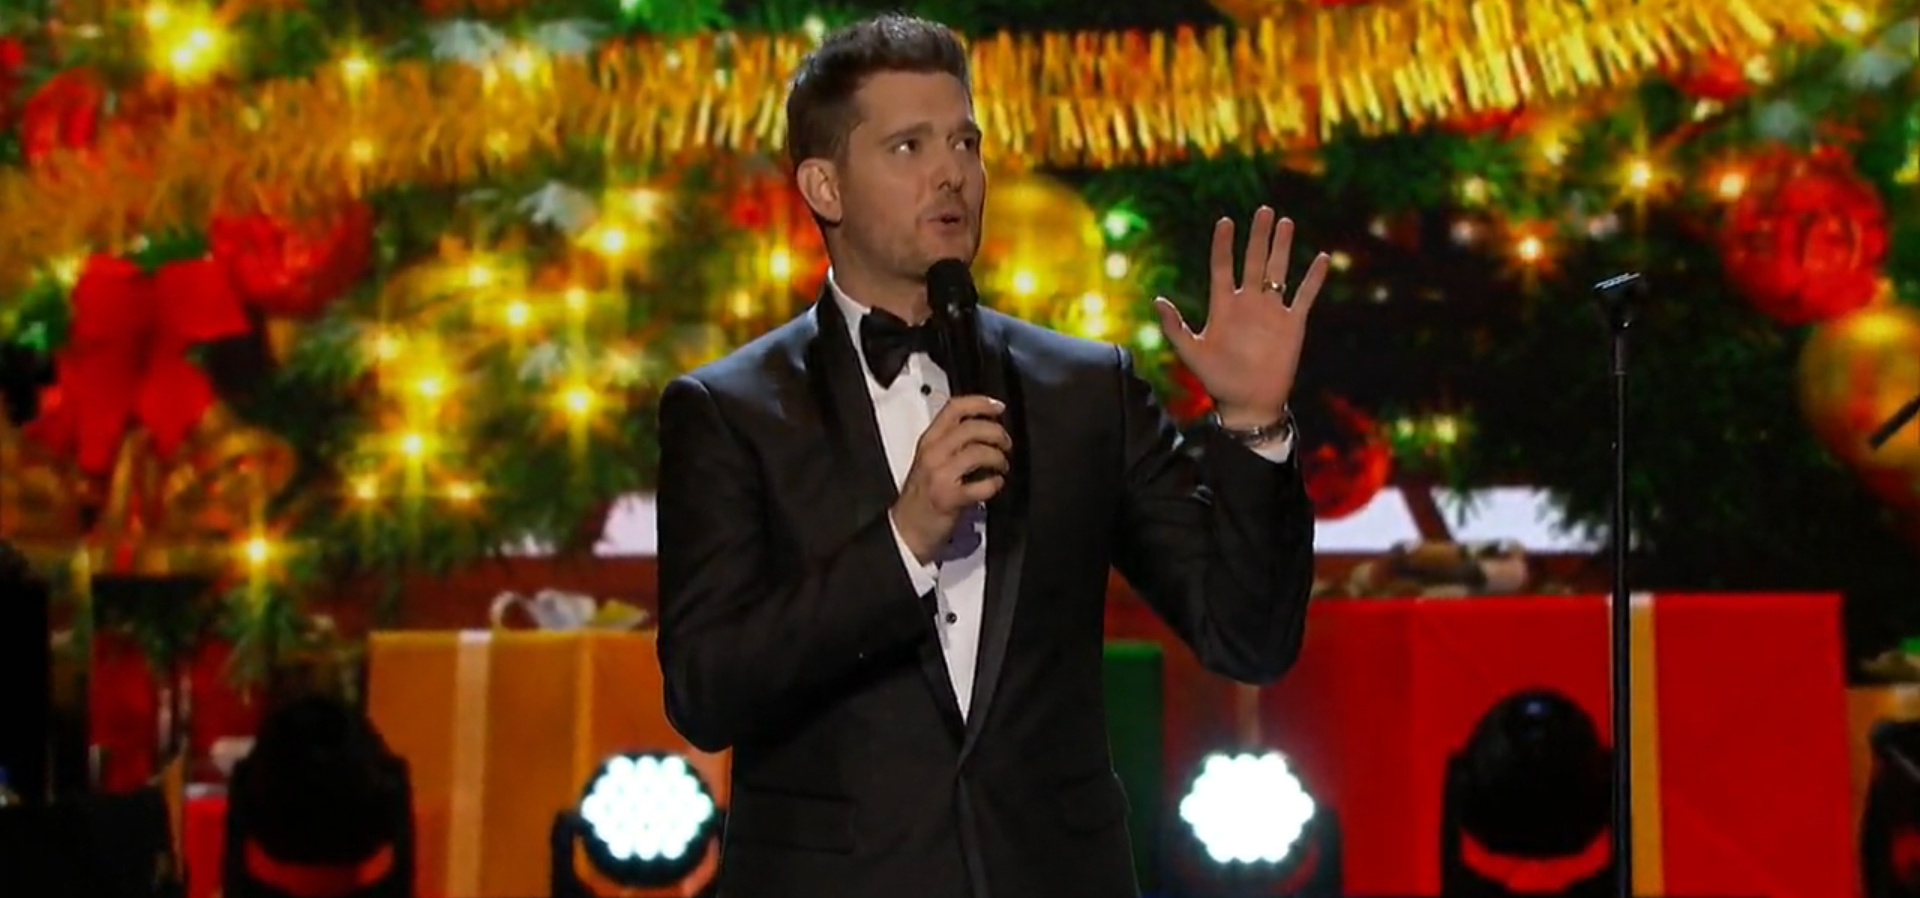 Best-bets for Dec. 6: Blake, Buble, boy bands